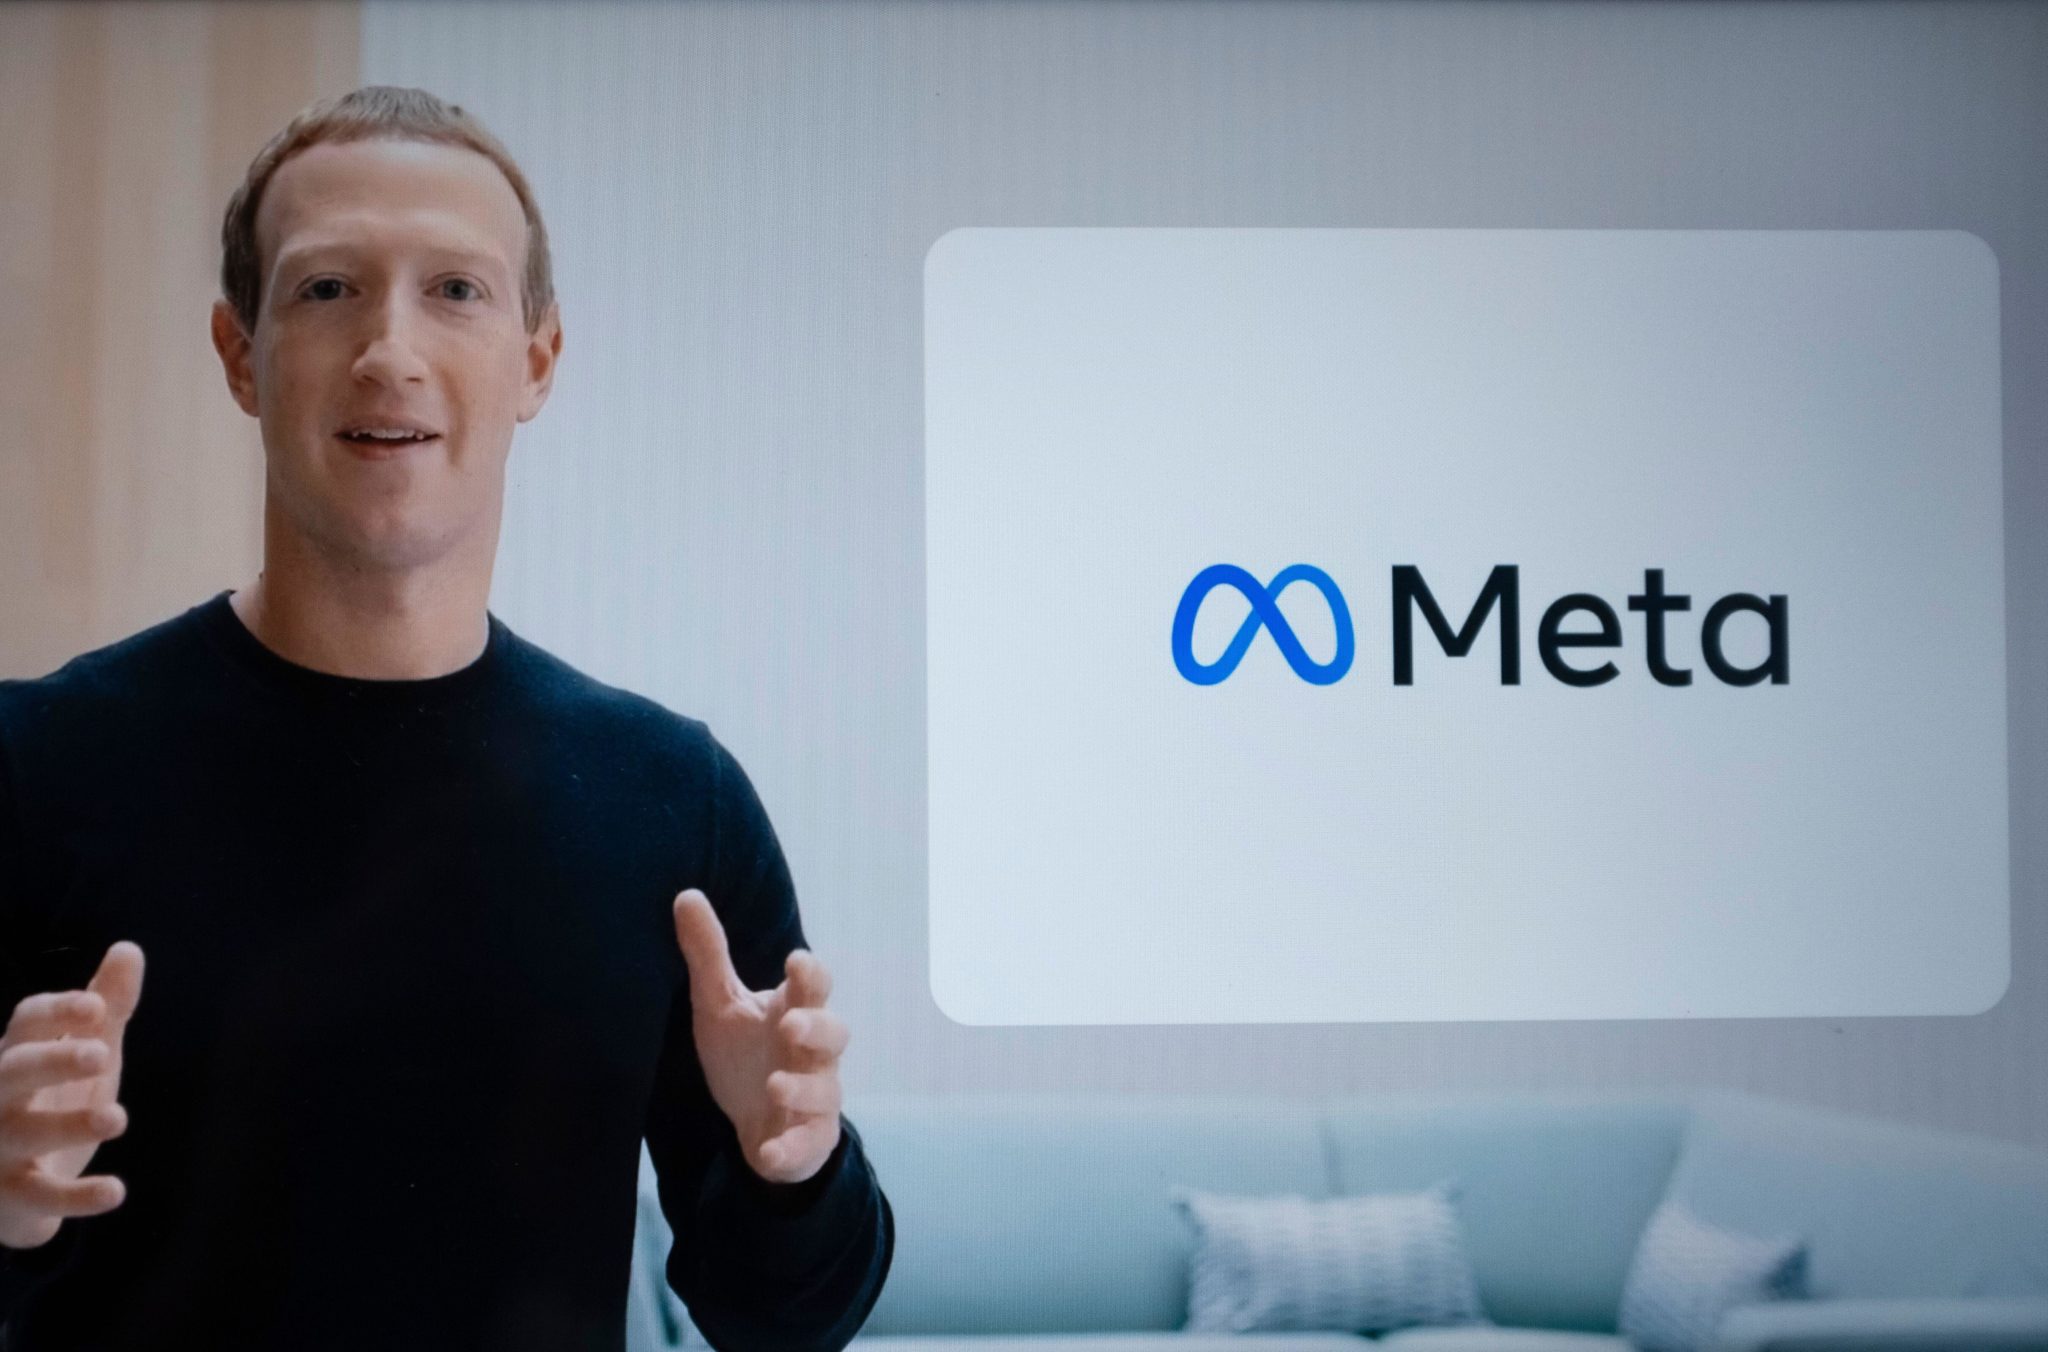 Facebook CEO Mark Zuckerberg announces during the company's live stream that the new company will be called Meta. Image: Sipa USA / Alamy Stock Photo